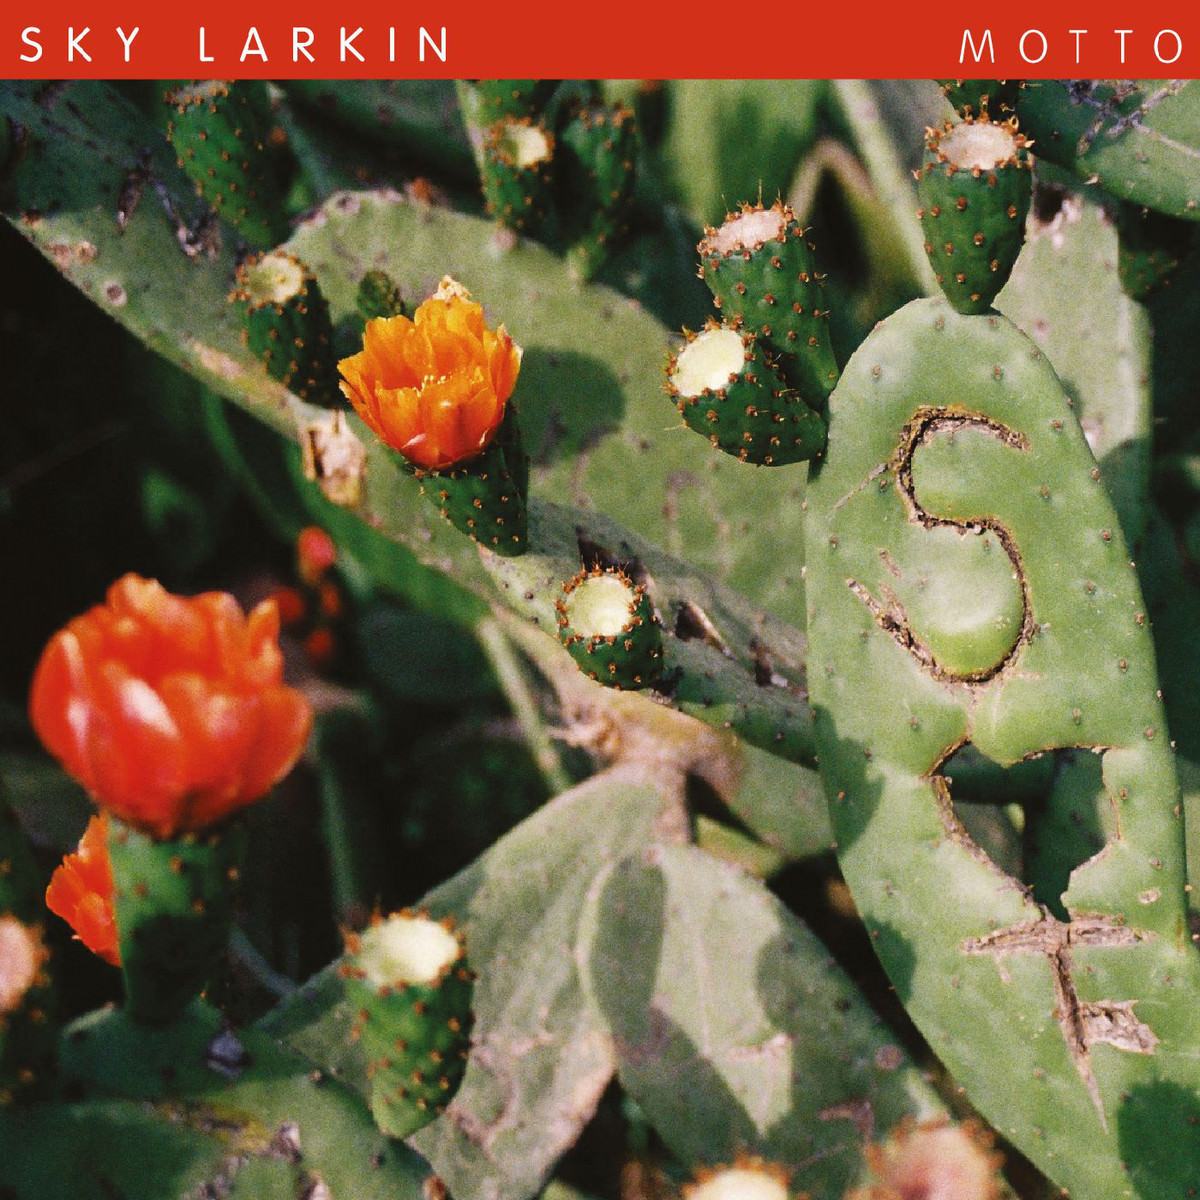 News Added Sep 11, 2013 Motto is the third album by Leeds trio Sky Larkin on Wichita Recordings. Recorded with long-term collaborator, producer John Goodmanson (Girls, Sleater Kinney, Los Campesinos!) in Seattle, Motto showcases Sky Larkin’s unshakable ability to conjure immediately satisfying, vibrant indie rock. The album was written for the most part whilst Sky […]